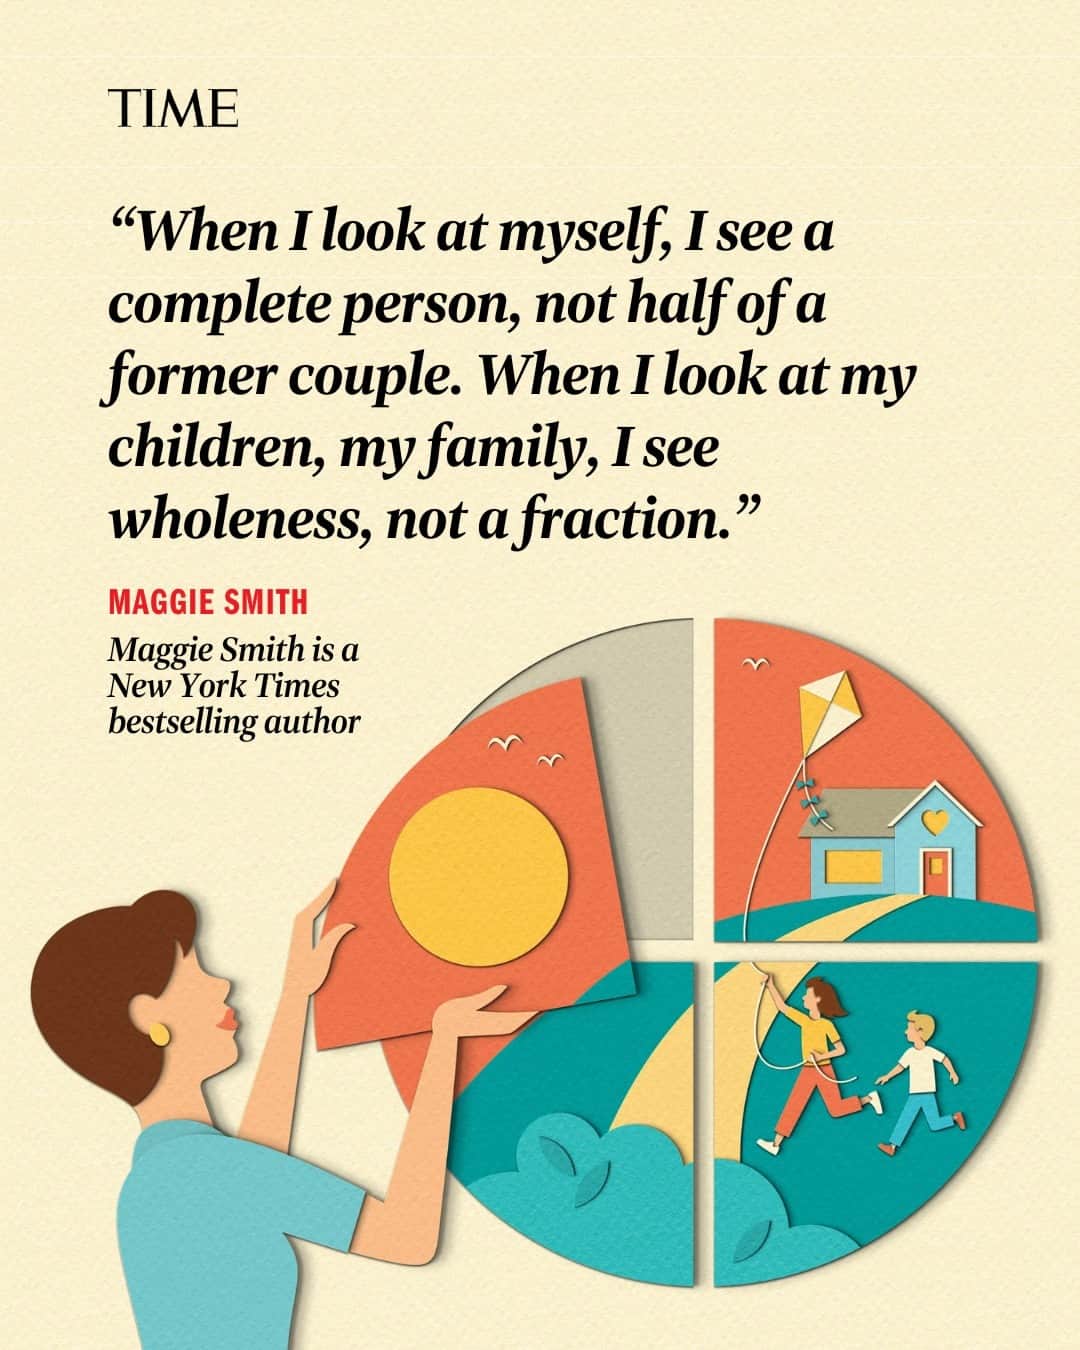 TIME Magazineのインスタグラム：「"When I was newly divorced, trying to make a fresh start for myself and my children, my thinking about my family and my new life was shaped by absence," writes Maggie Smith. "I looked at us and saw what was missing instead of what was there."  In a new essay for TIME, the New York Times bestselling author reflects on how she found fullness after her divorce.  Illustration by Zara Picken for TIME」